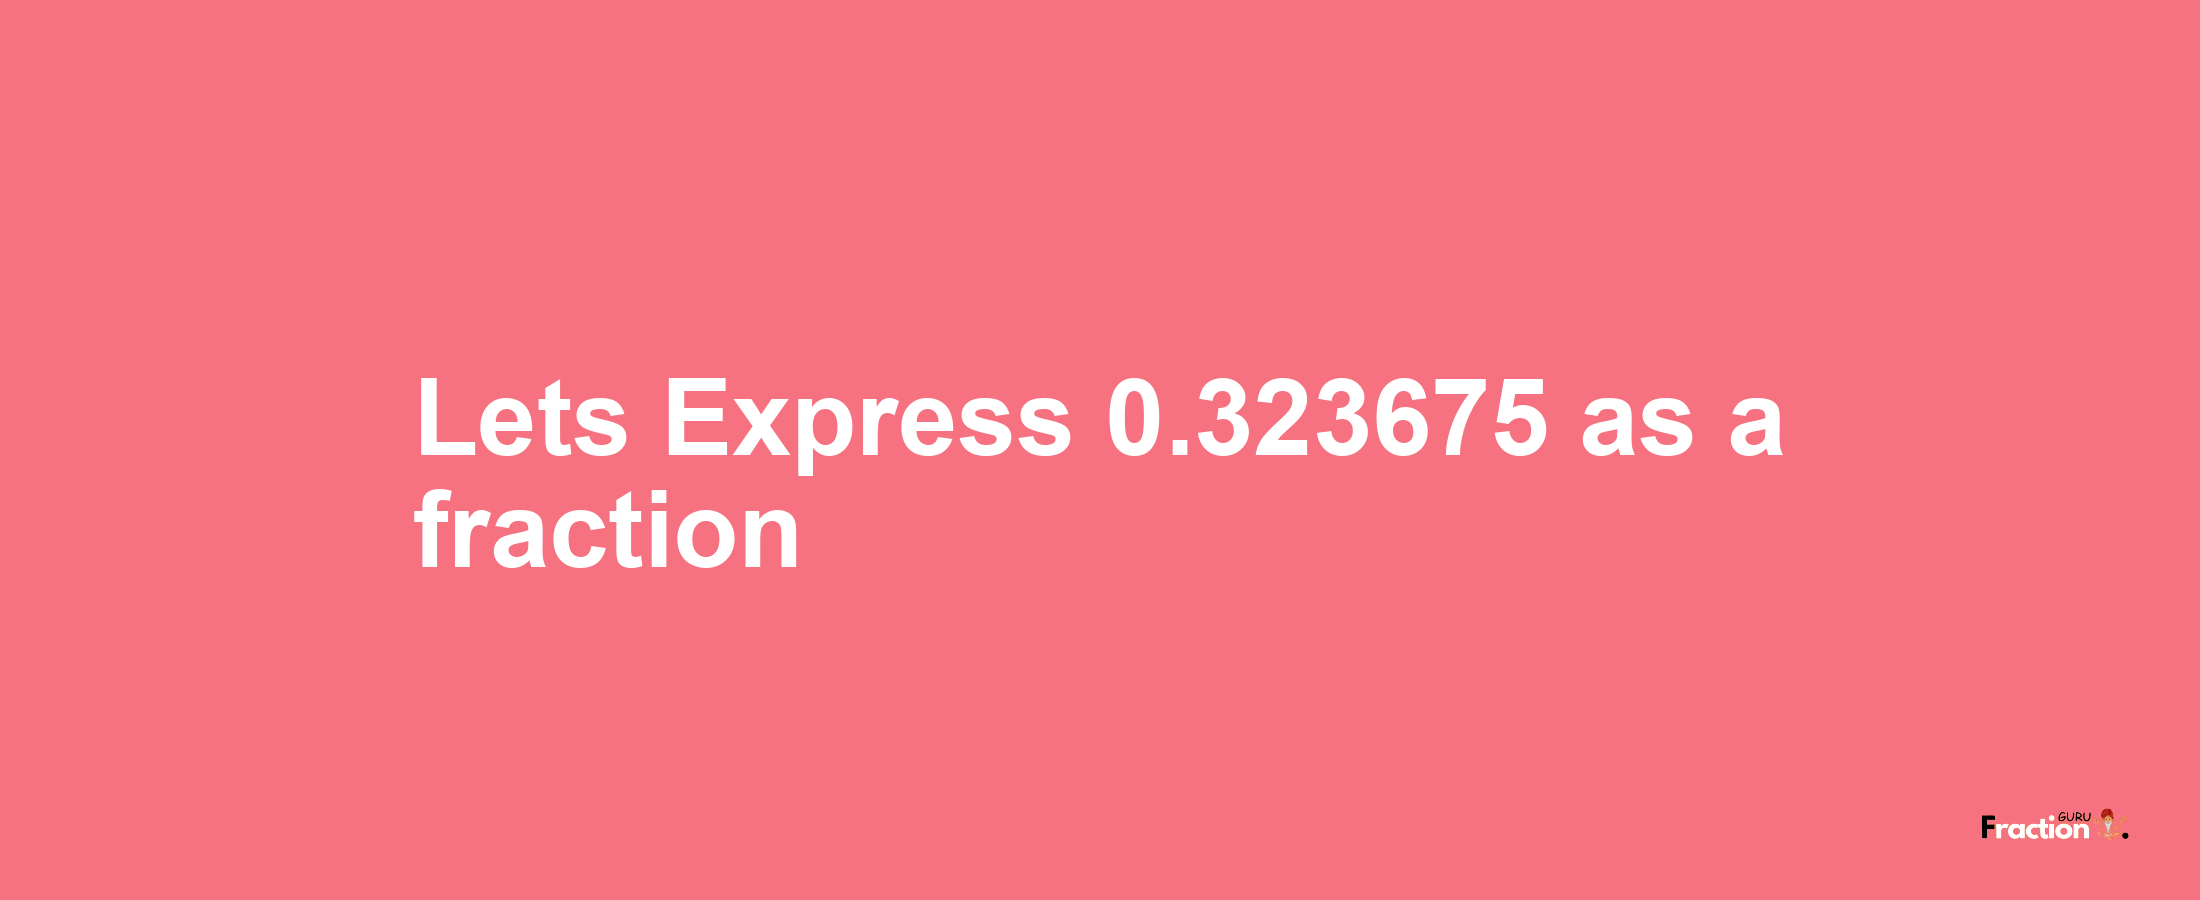 Lets Express 0.323675 as afraction